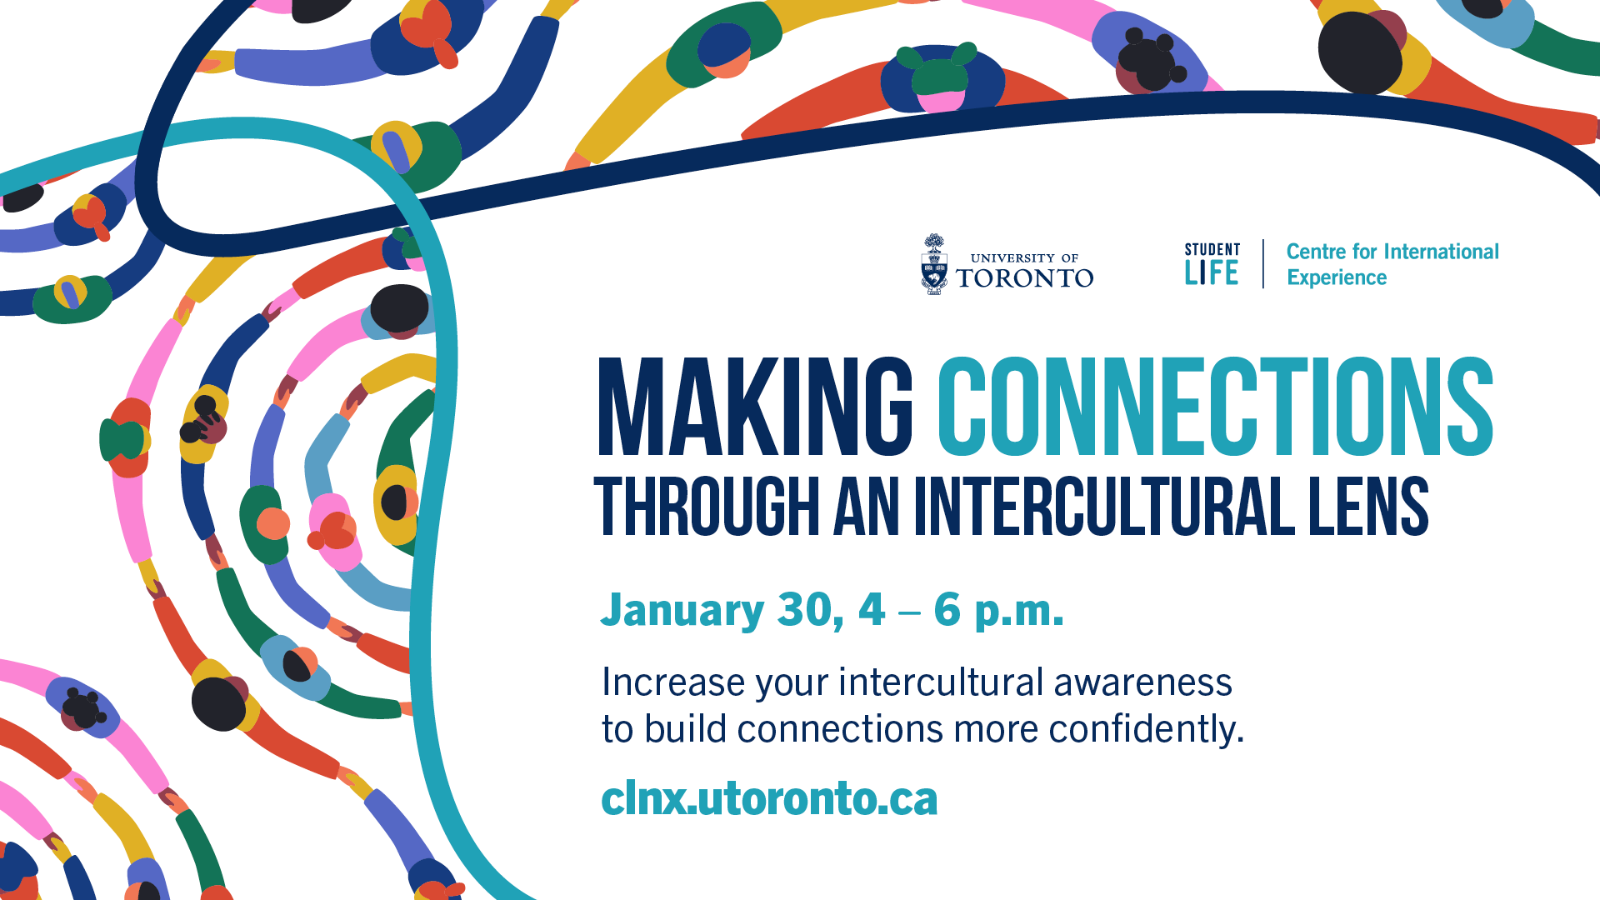 An image of people holding hands with text "Making Connections Through An Intercultural Lens. January 30, 4-6 p.m. Increase your intercultural awareness to build connections more confidently. clnx.utoronto.ca"